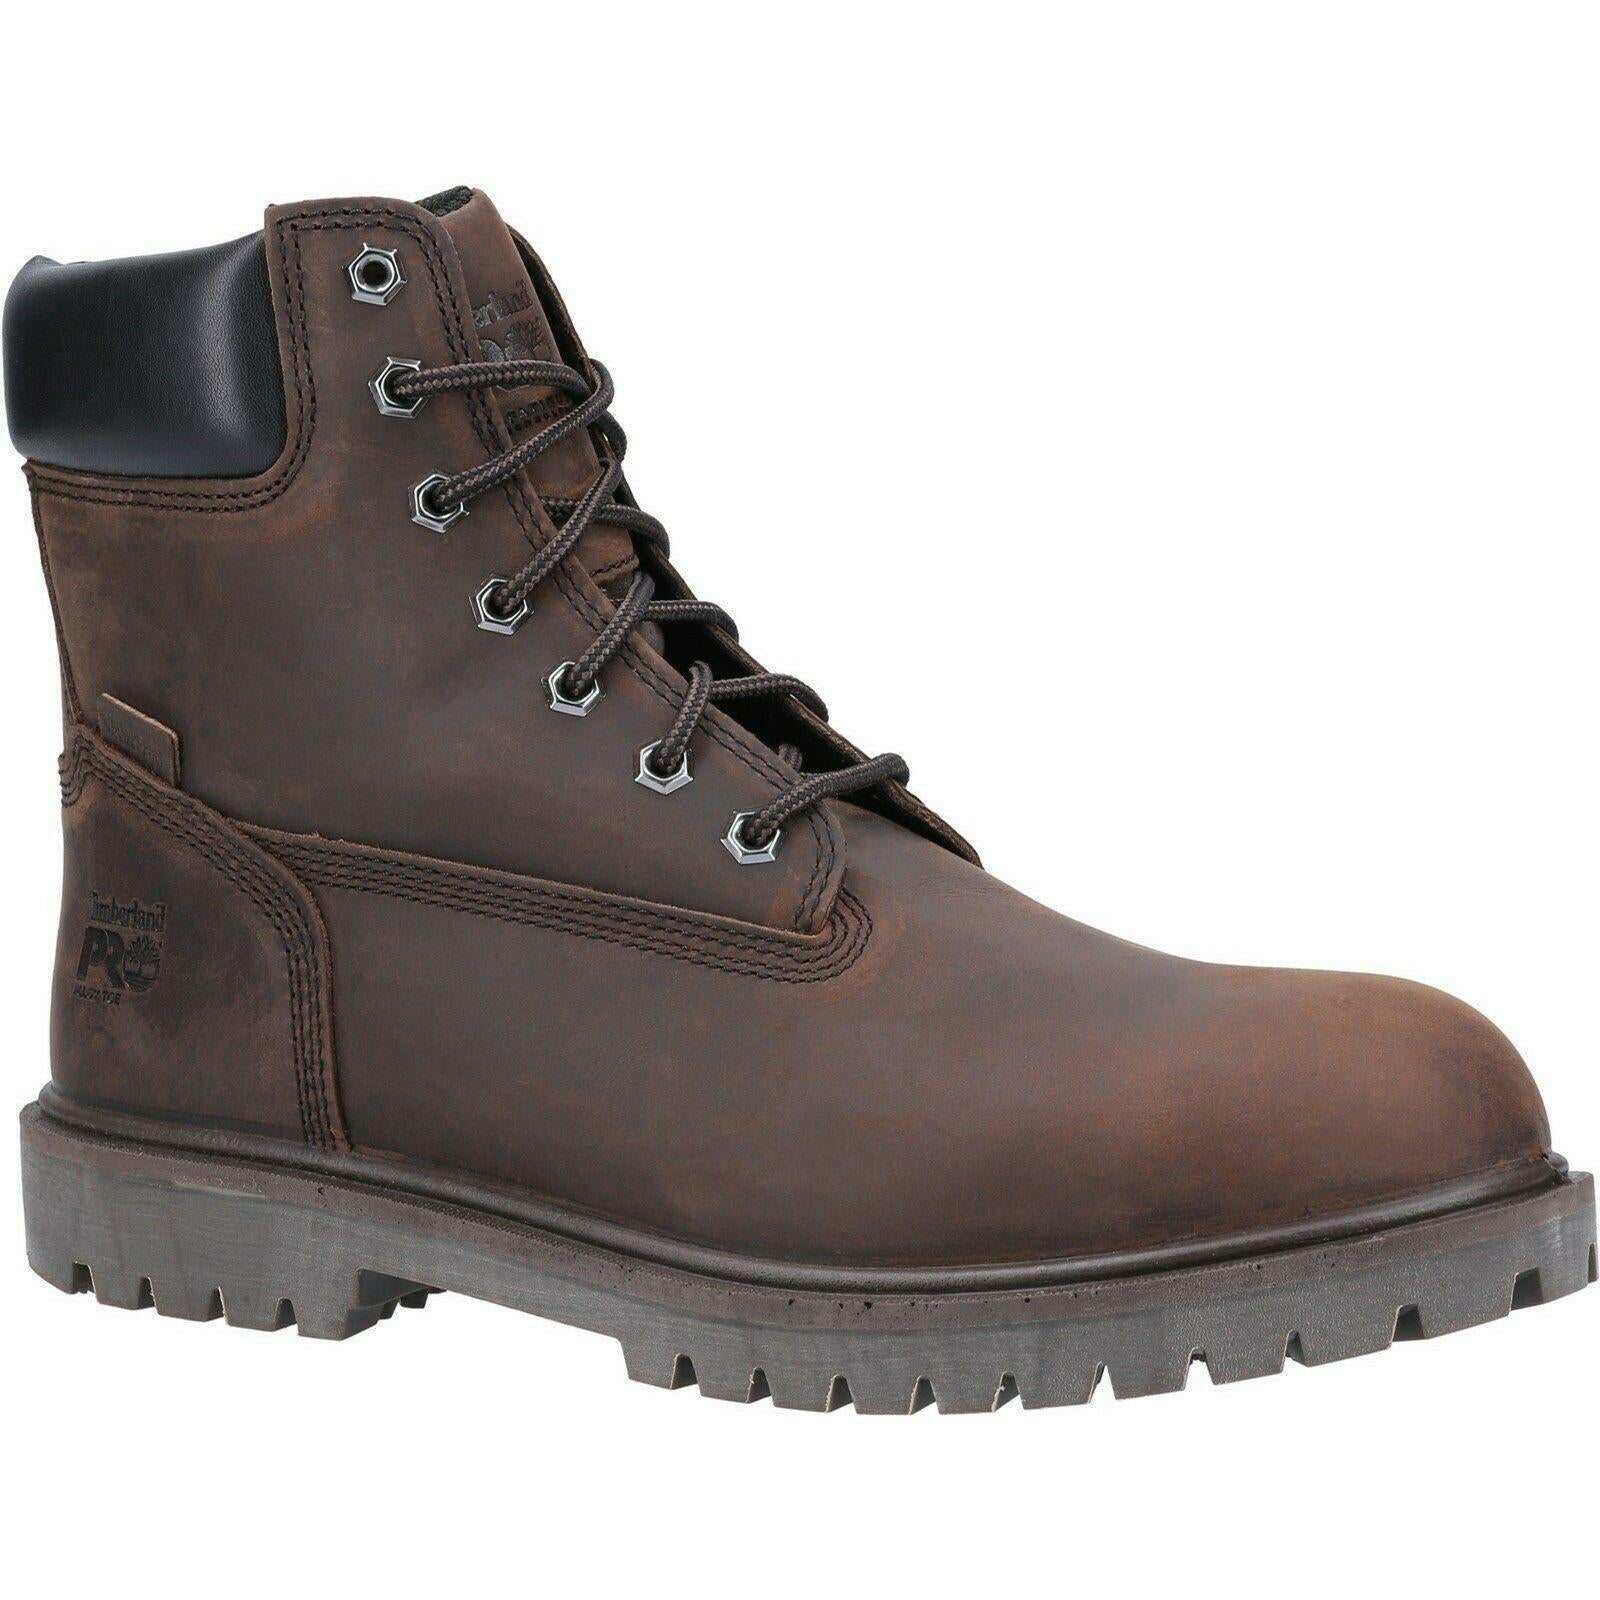 Timberland Iconic S3 brown leather waterproof alloy toe/midsole work safety boot